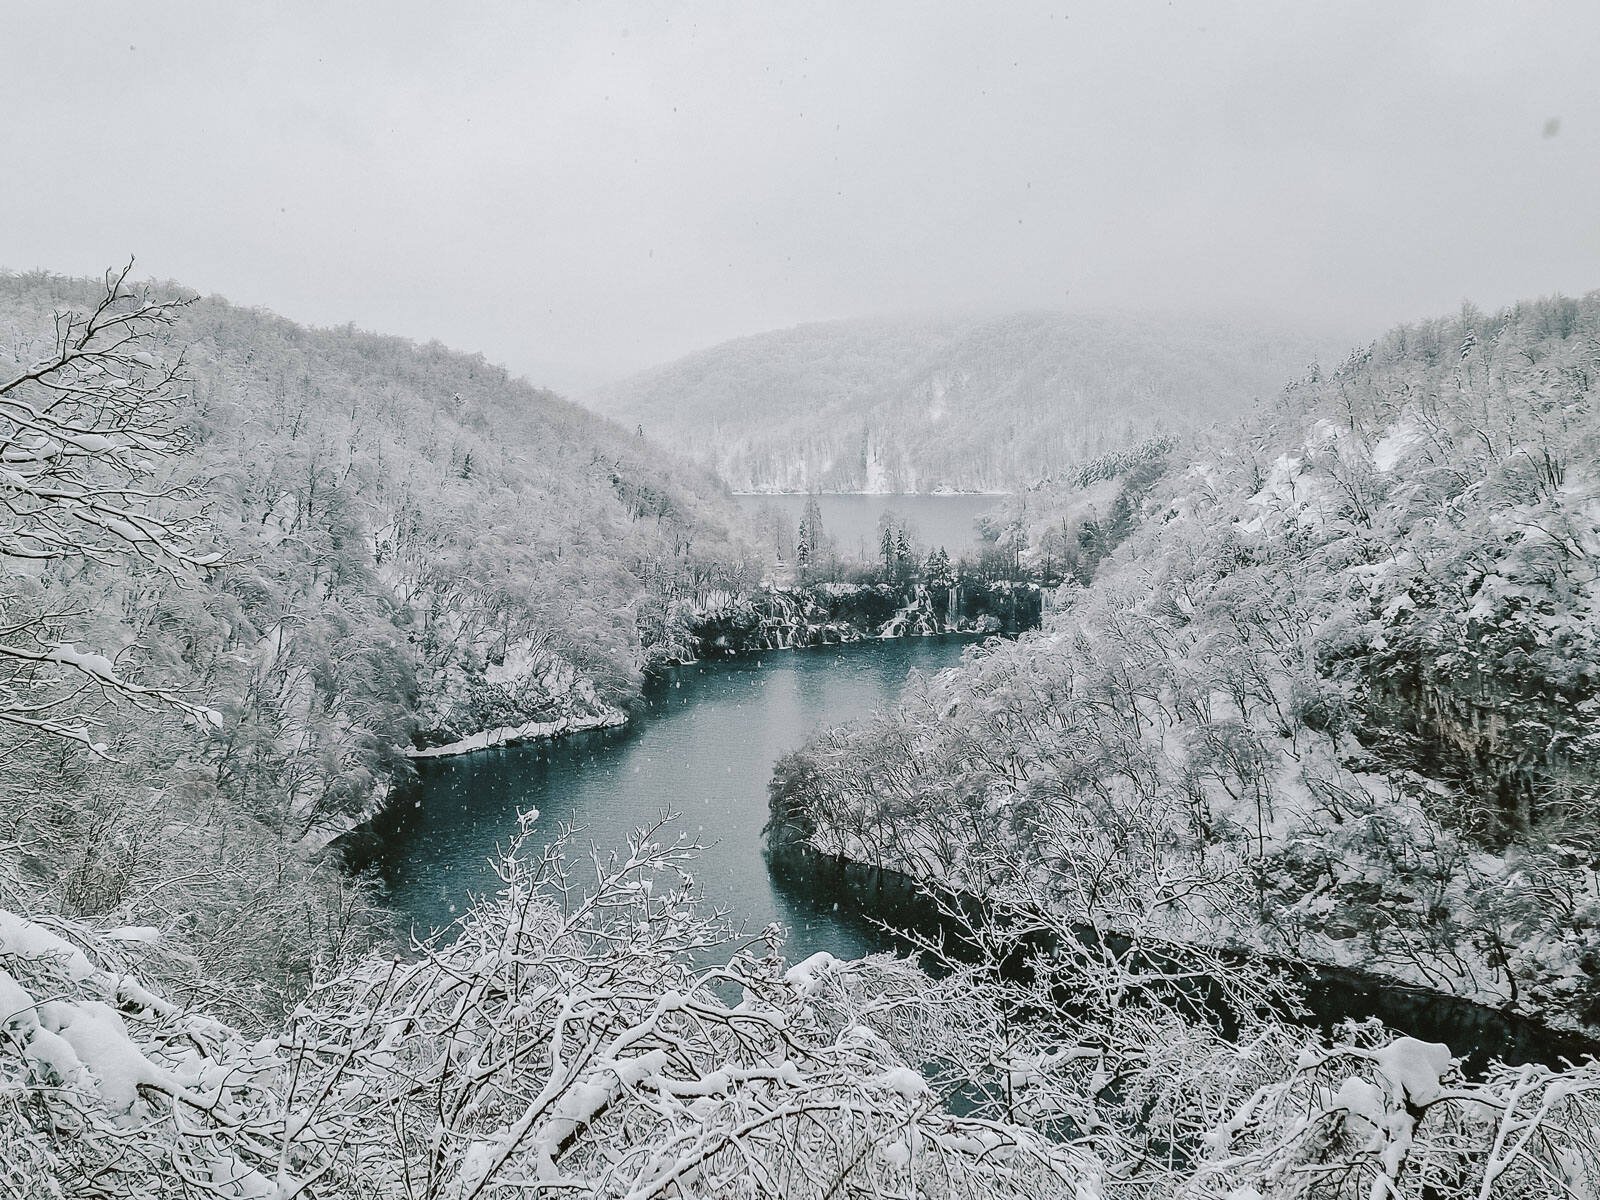 A panoramic view of Plitvice National Park in winter looking across a dark blue lake with snow covered trees on the hills each side, cloud is low hanging over more hills in the distance